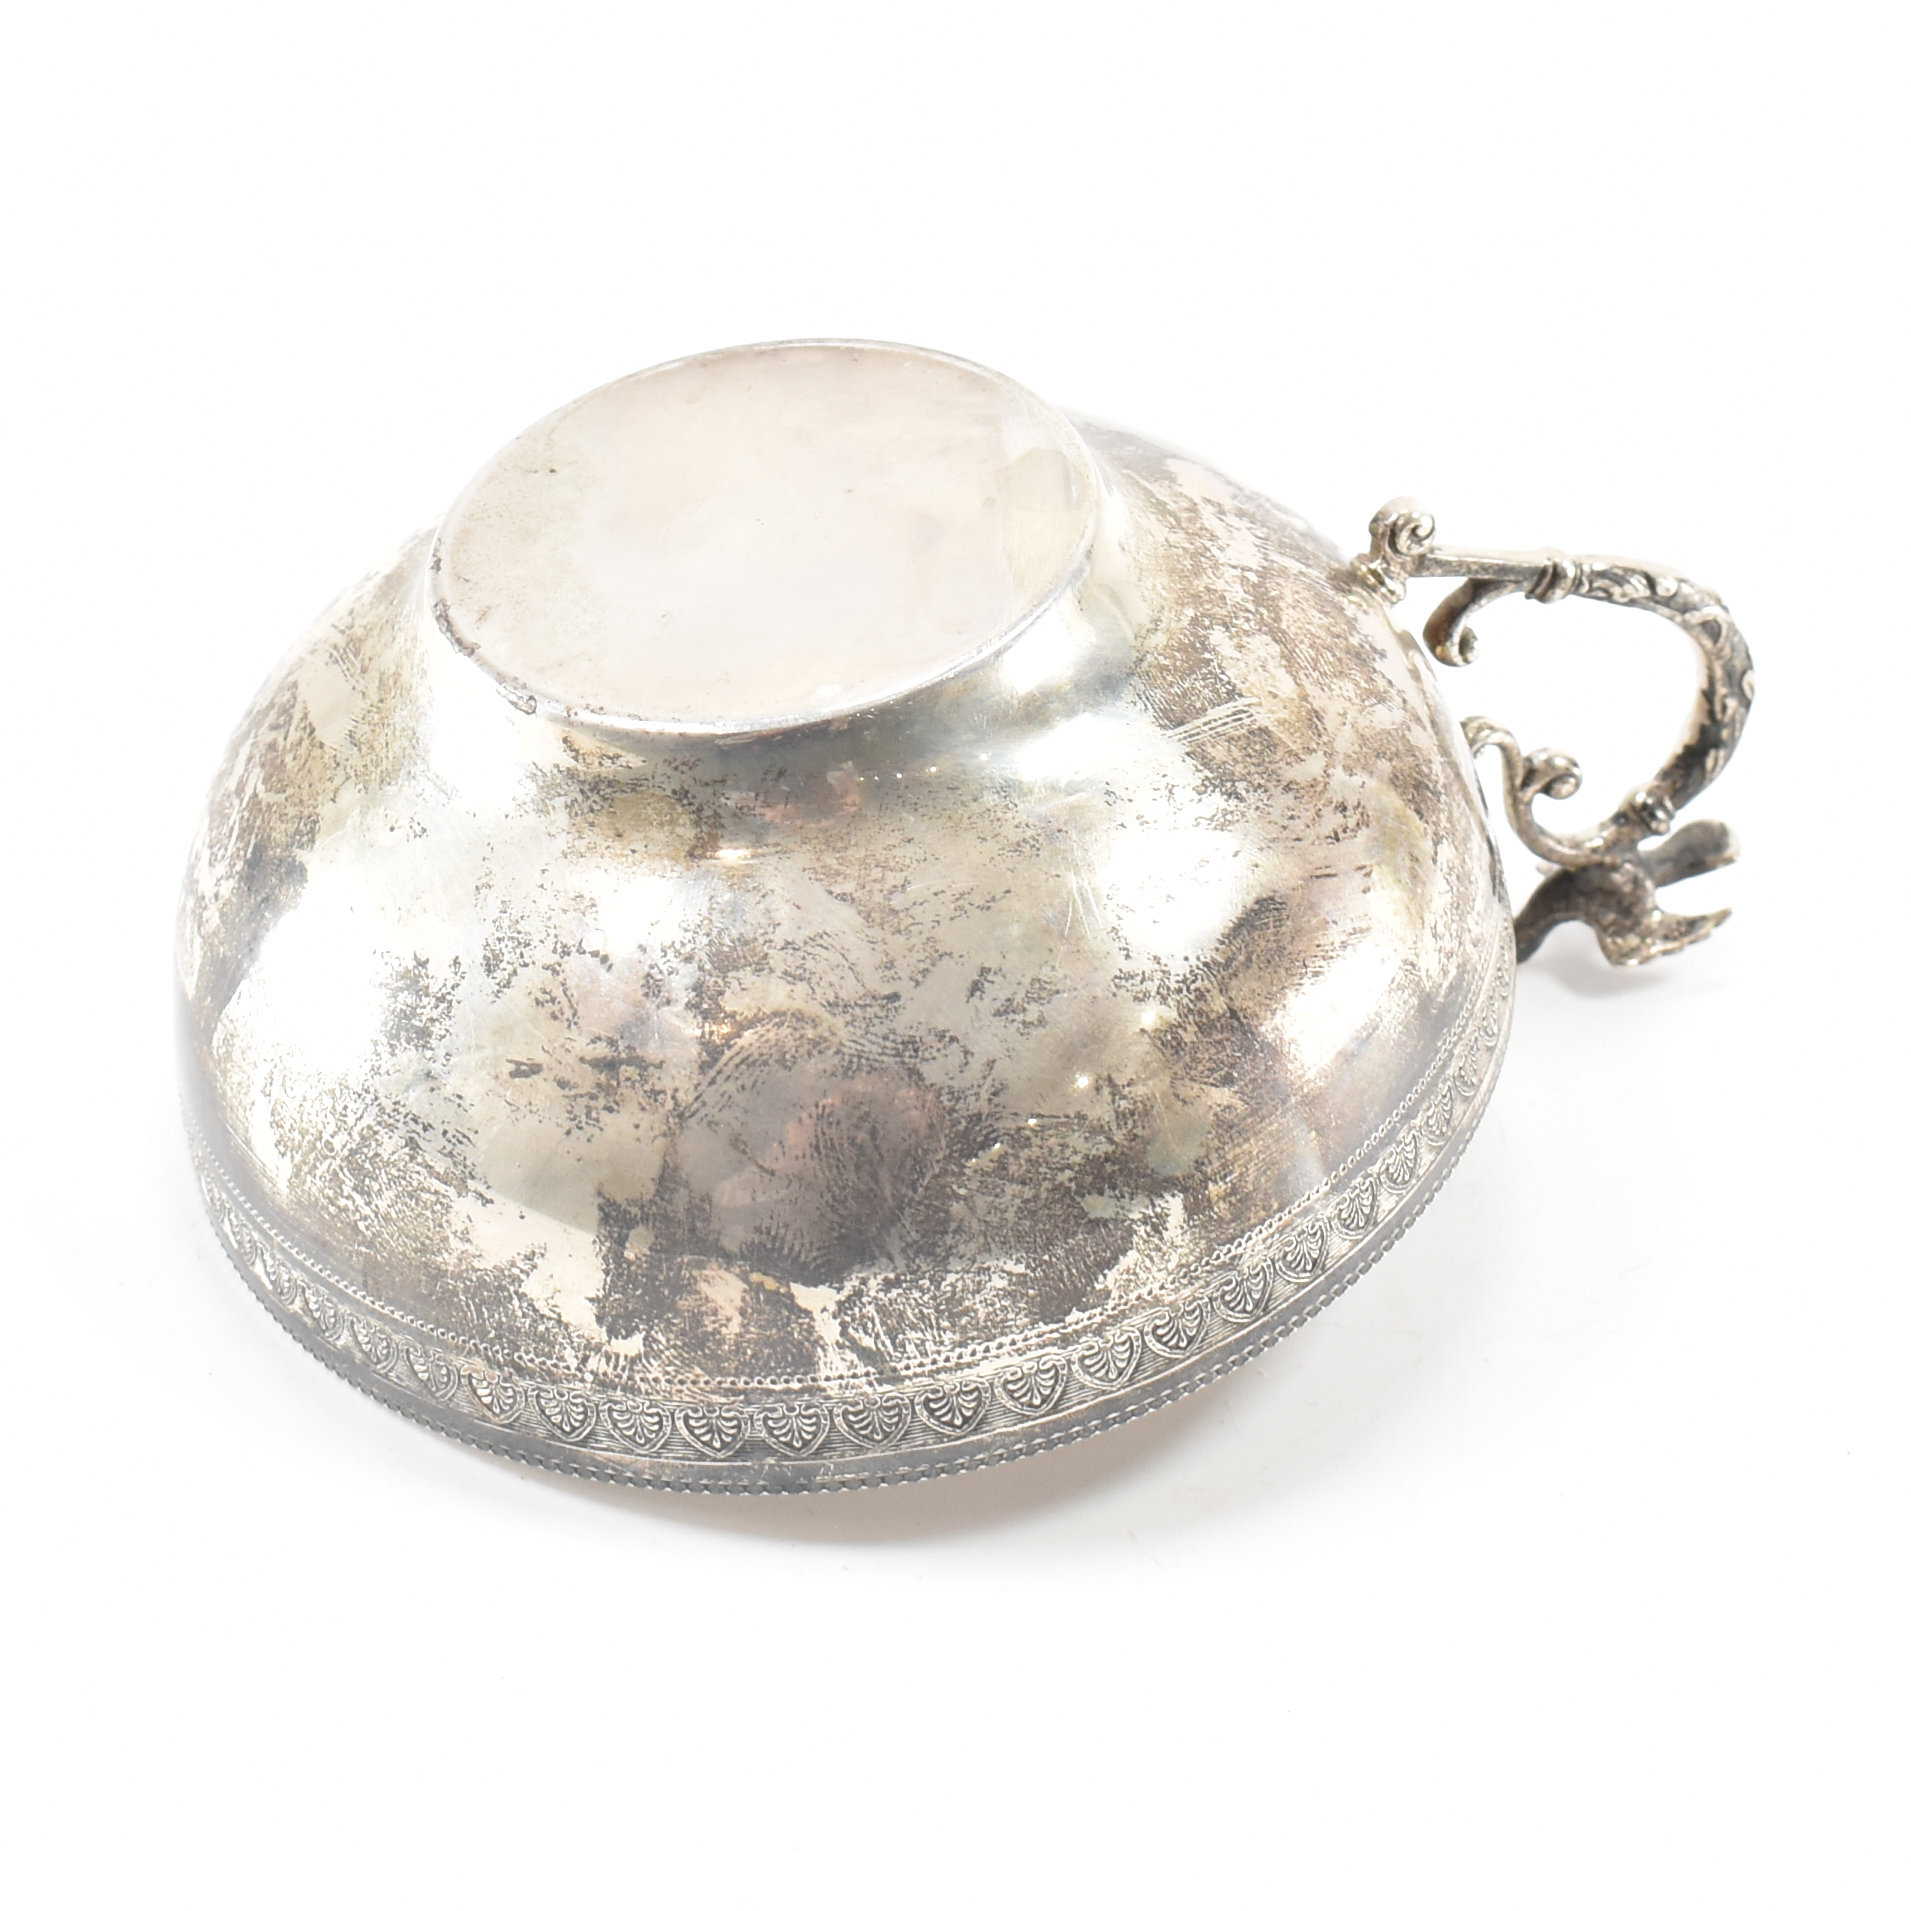 925 SILVER CUP BOWL & LAMA HANDLED BELL - Image 7 of 9